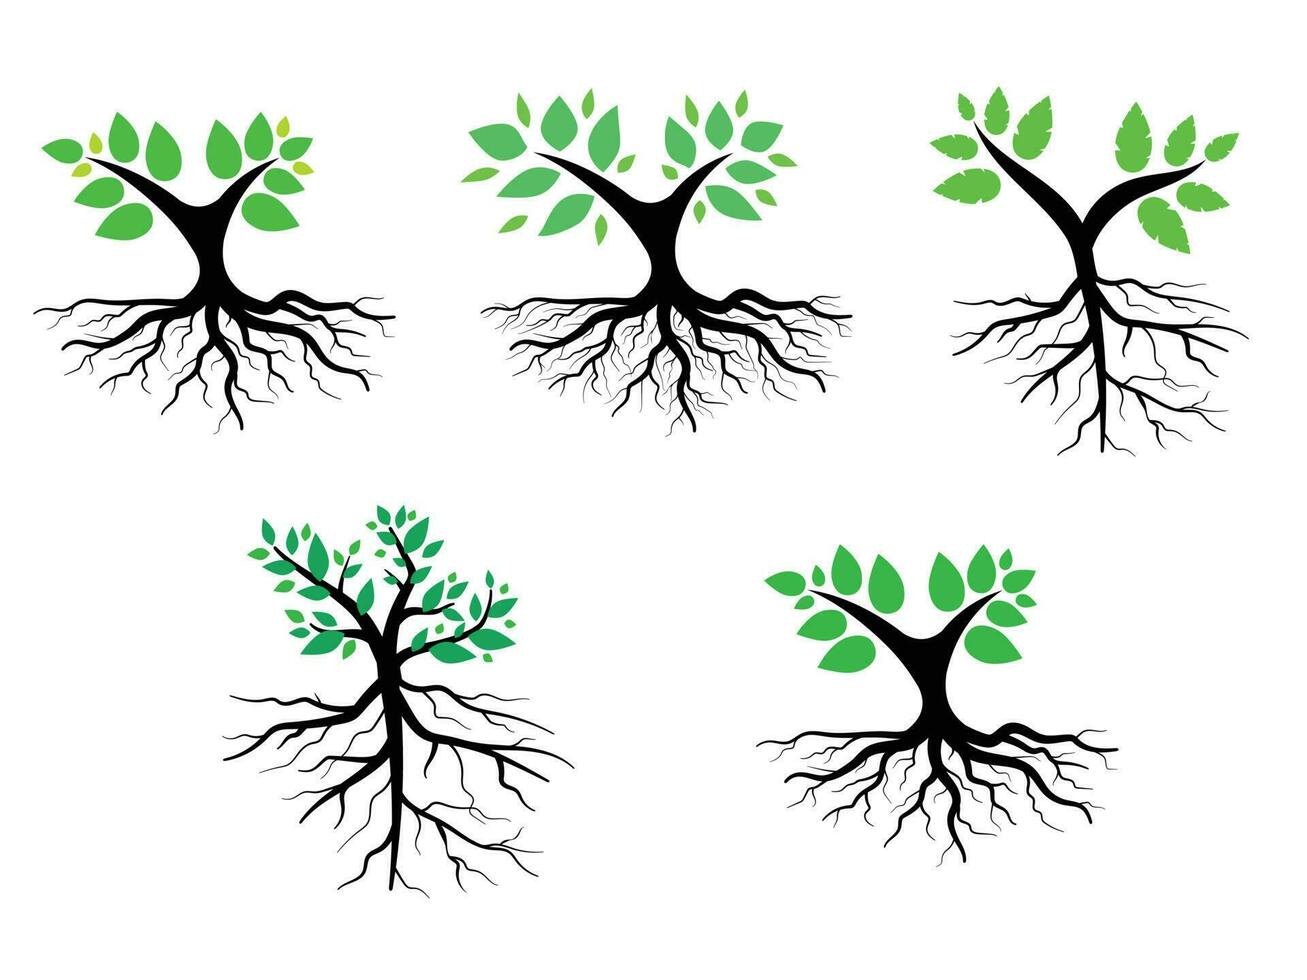 Tree and roots with green leaves look beautiful and refreshing. Tree and roots LOGO style. vector